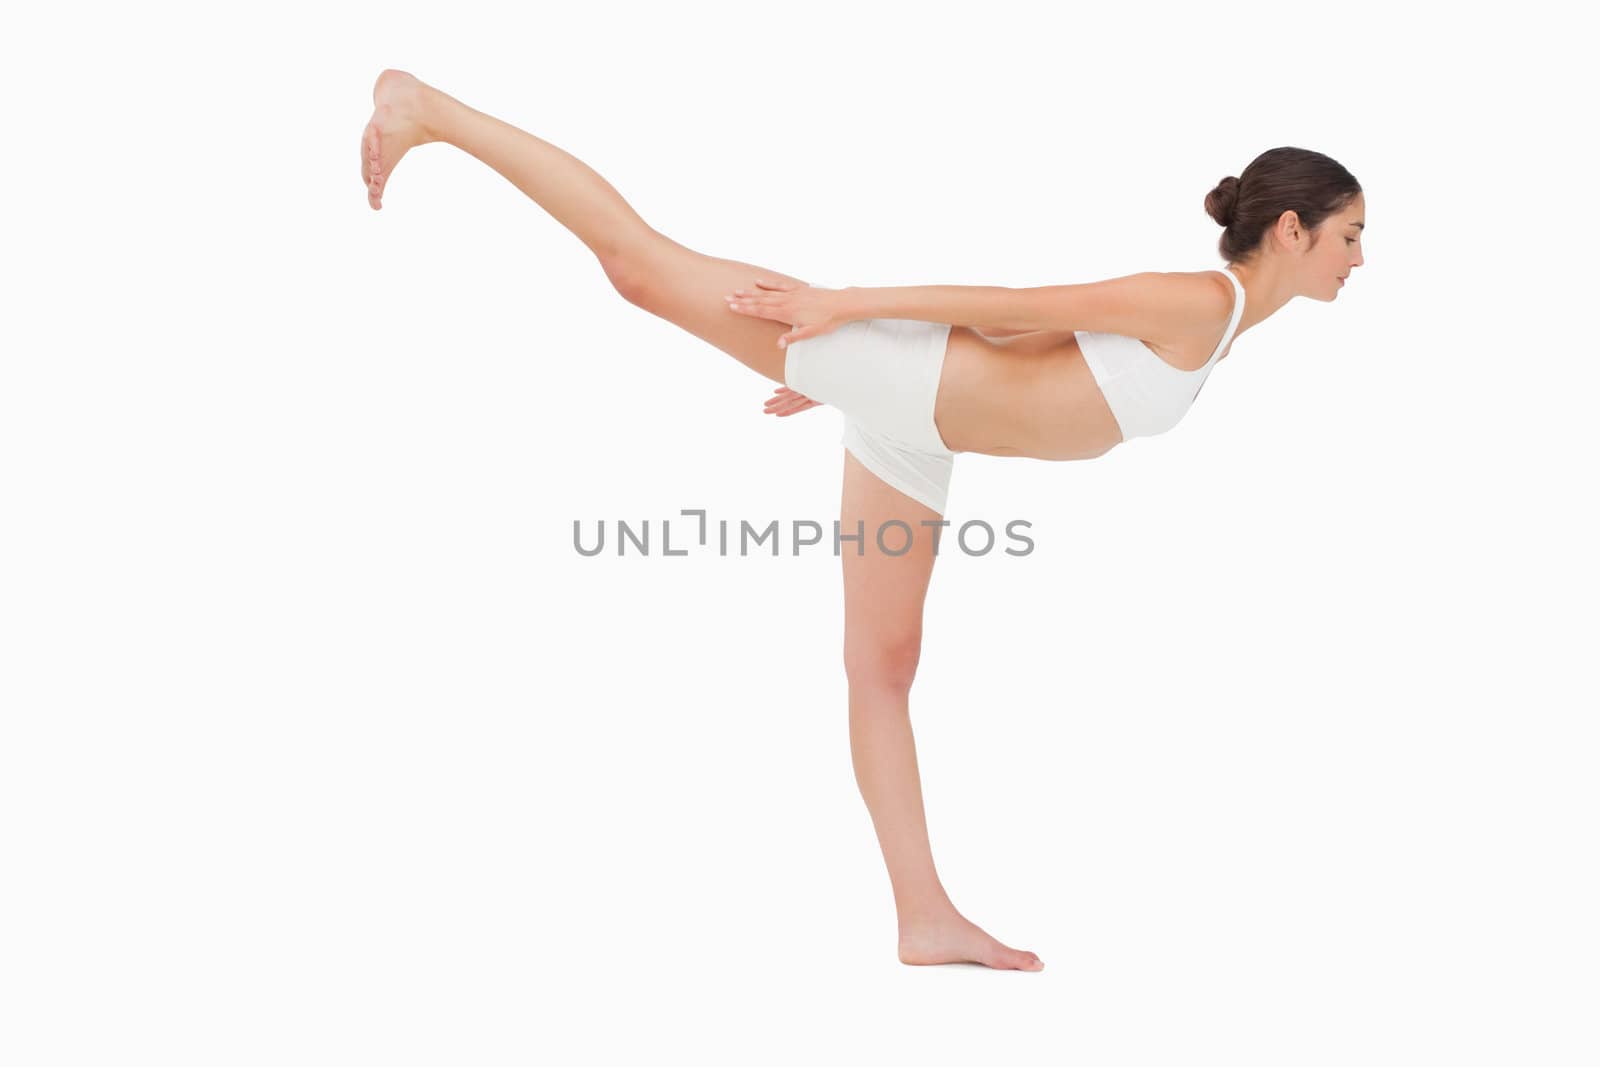 Woman in yoga position against white background